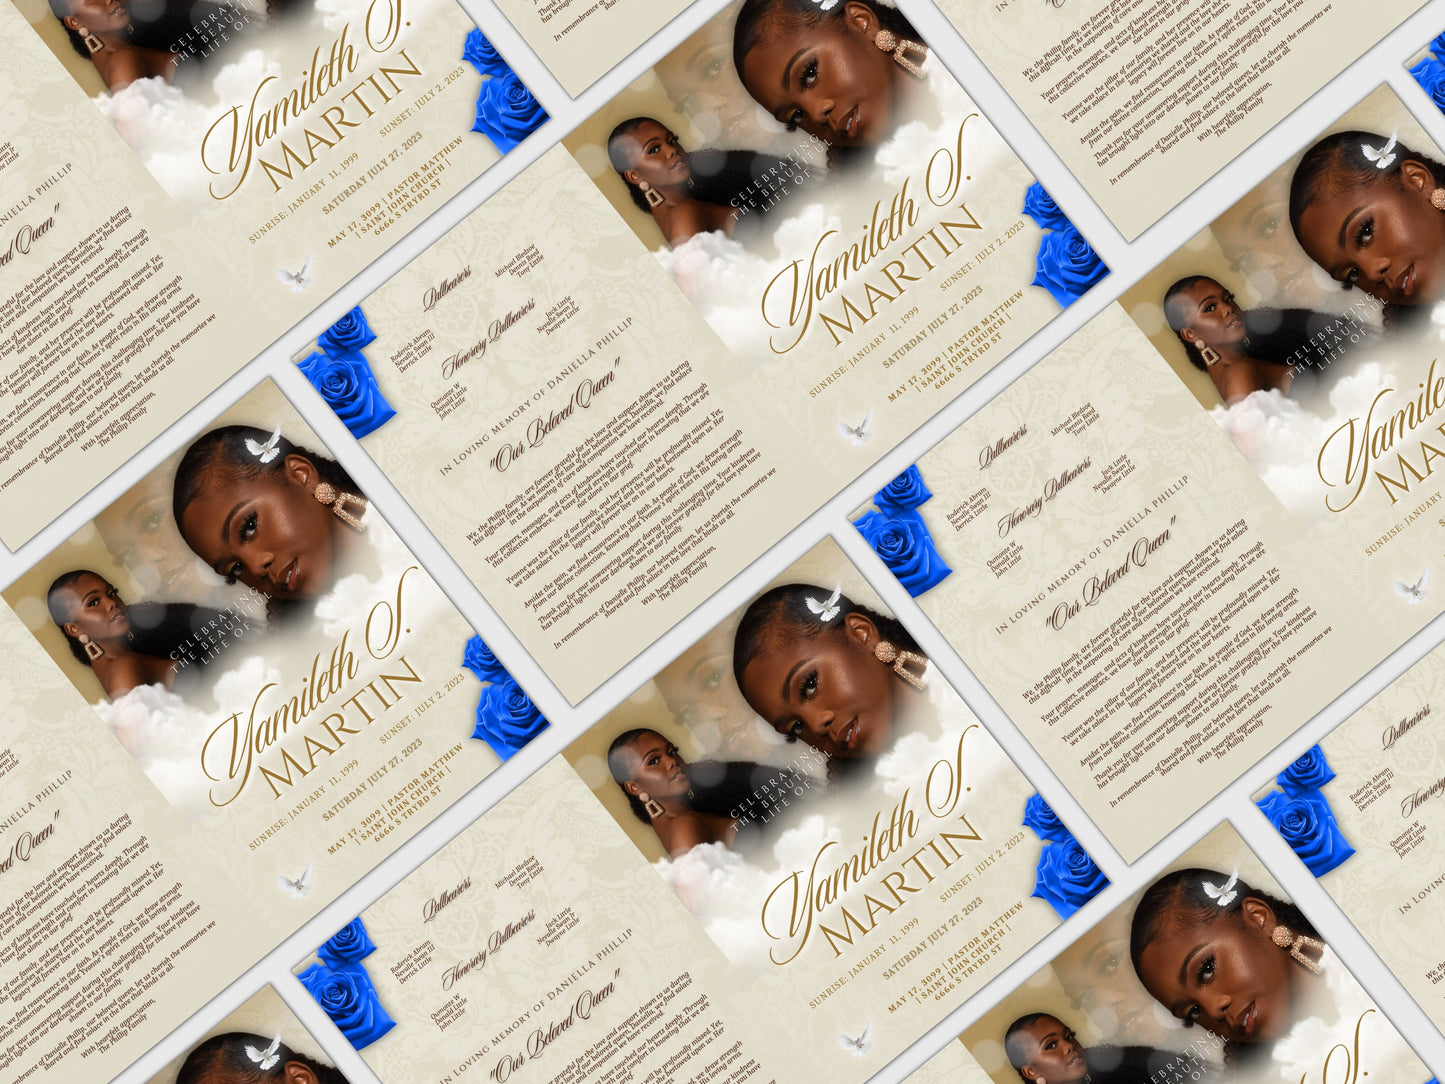 8.5"x11" BOOKLET Memorial program (4 pages)| CREME with pop of BLUE Style Funeral Program |Digital Download |Celebration of life